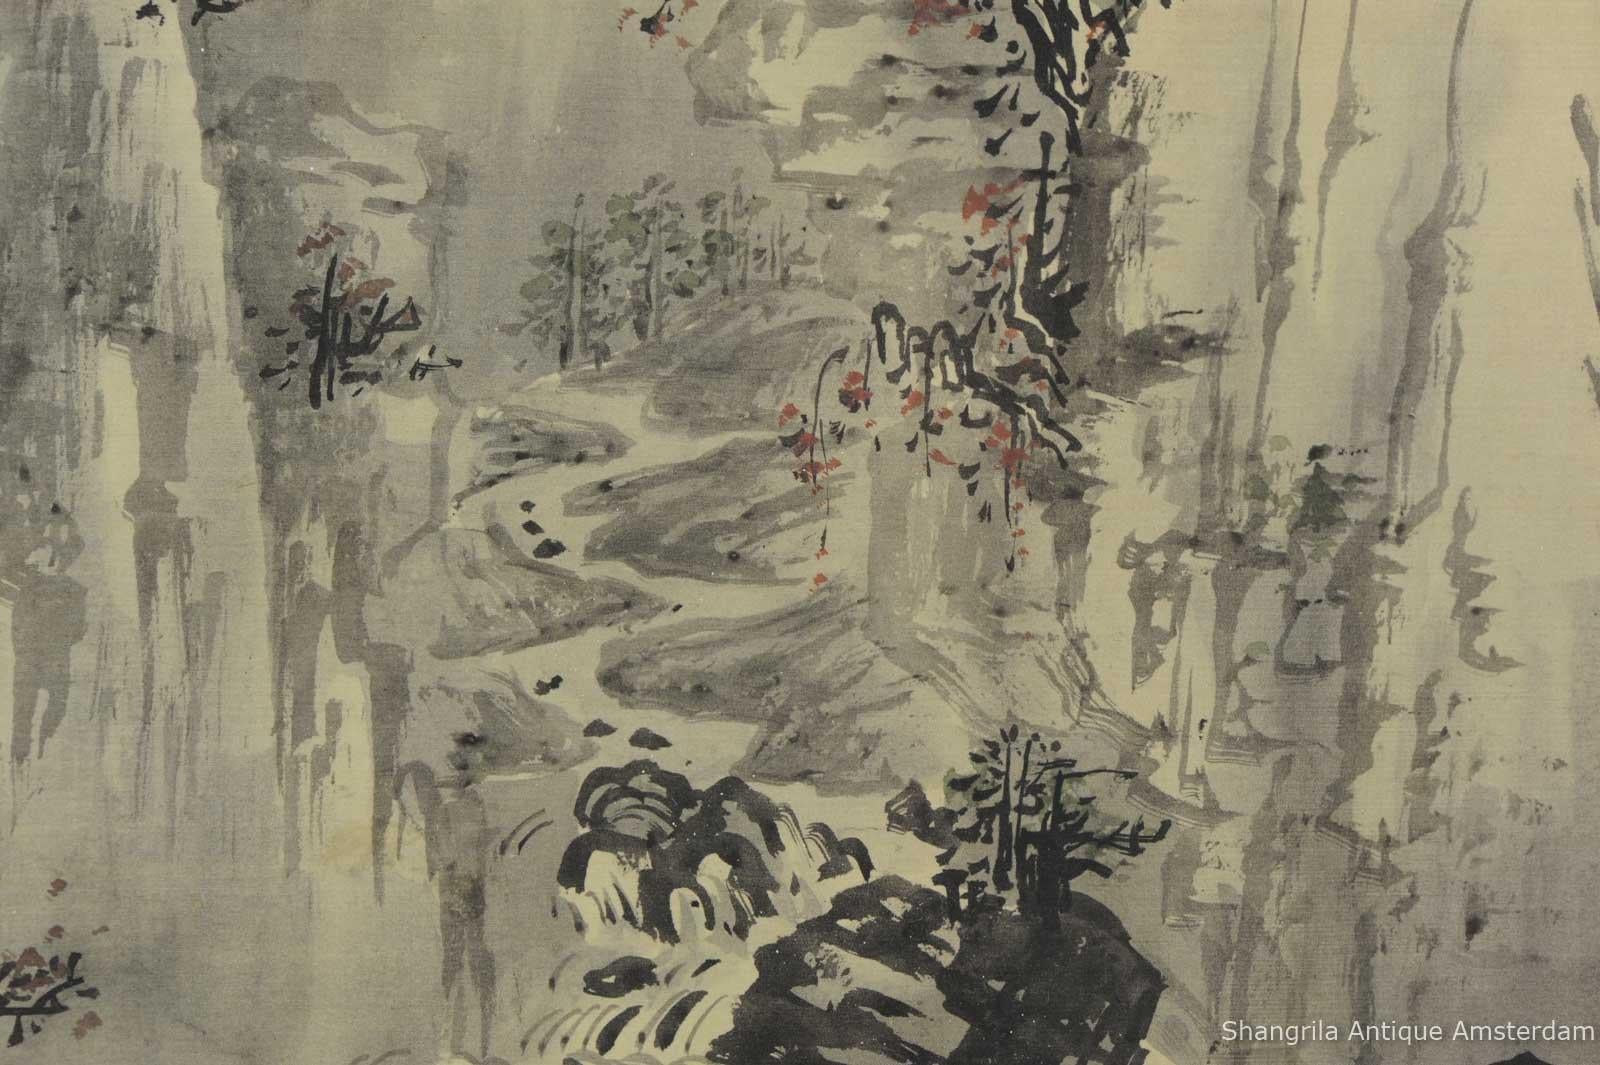 Lovely landscape painting.

Additional information:
Material: Porcelain & Pottery
Region of Origin: China
Country of Manufacturing: China
Period: 19th century, 20th century Qing (1661 - 1912), Republic / Minguo (1912 - 1949)
Original/Reproduction: